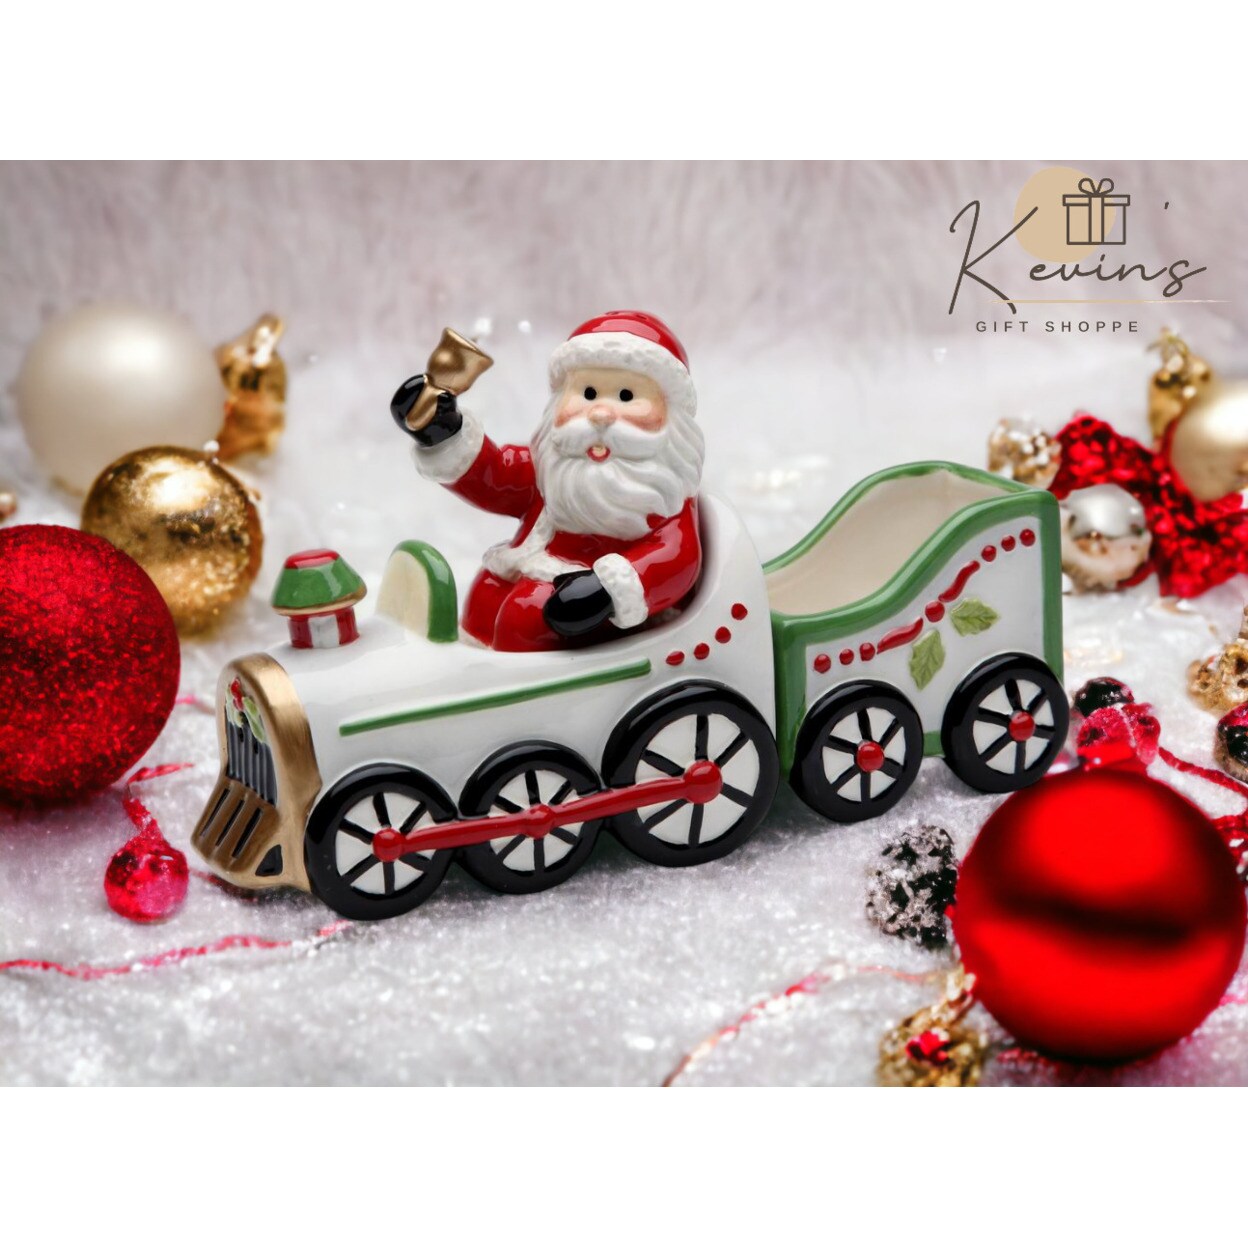 kevinsgiftshoppe Ceramic Christmas Santa Driving Train Salt and Pepper Shakers With Sugar Pack Holder Home Decor   Kitchen Decor